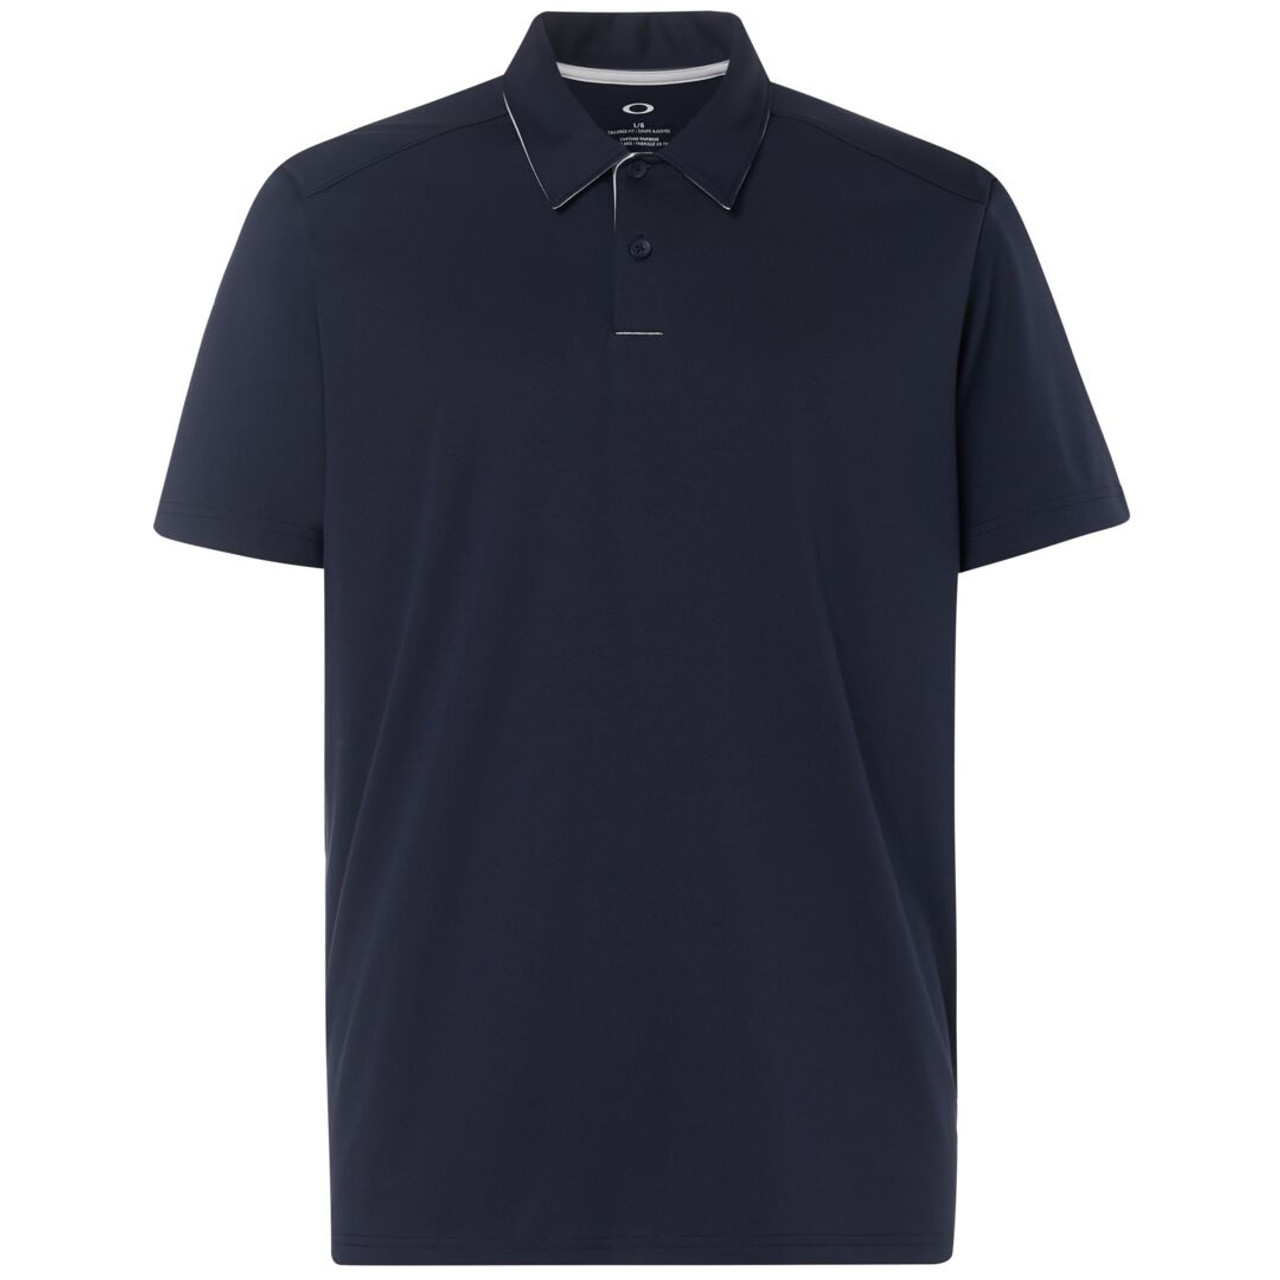 Oakley Golf Prior Generation Divisional Polo Shirt 